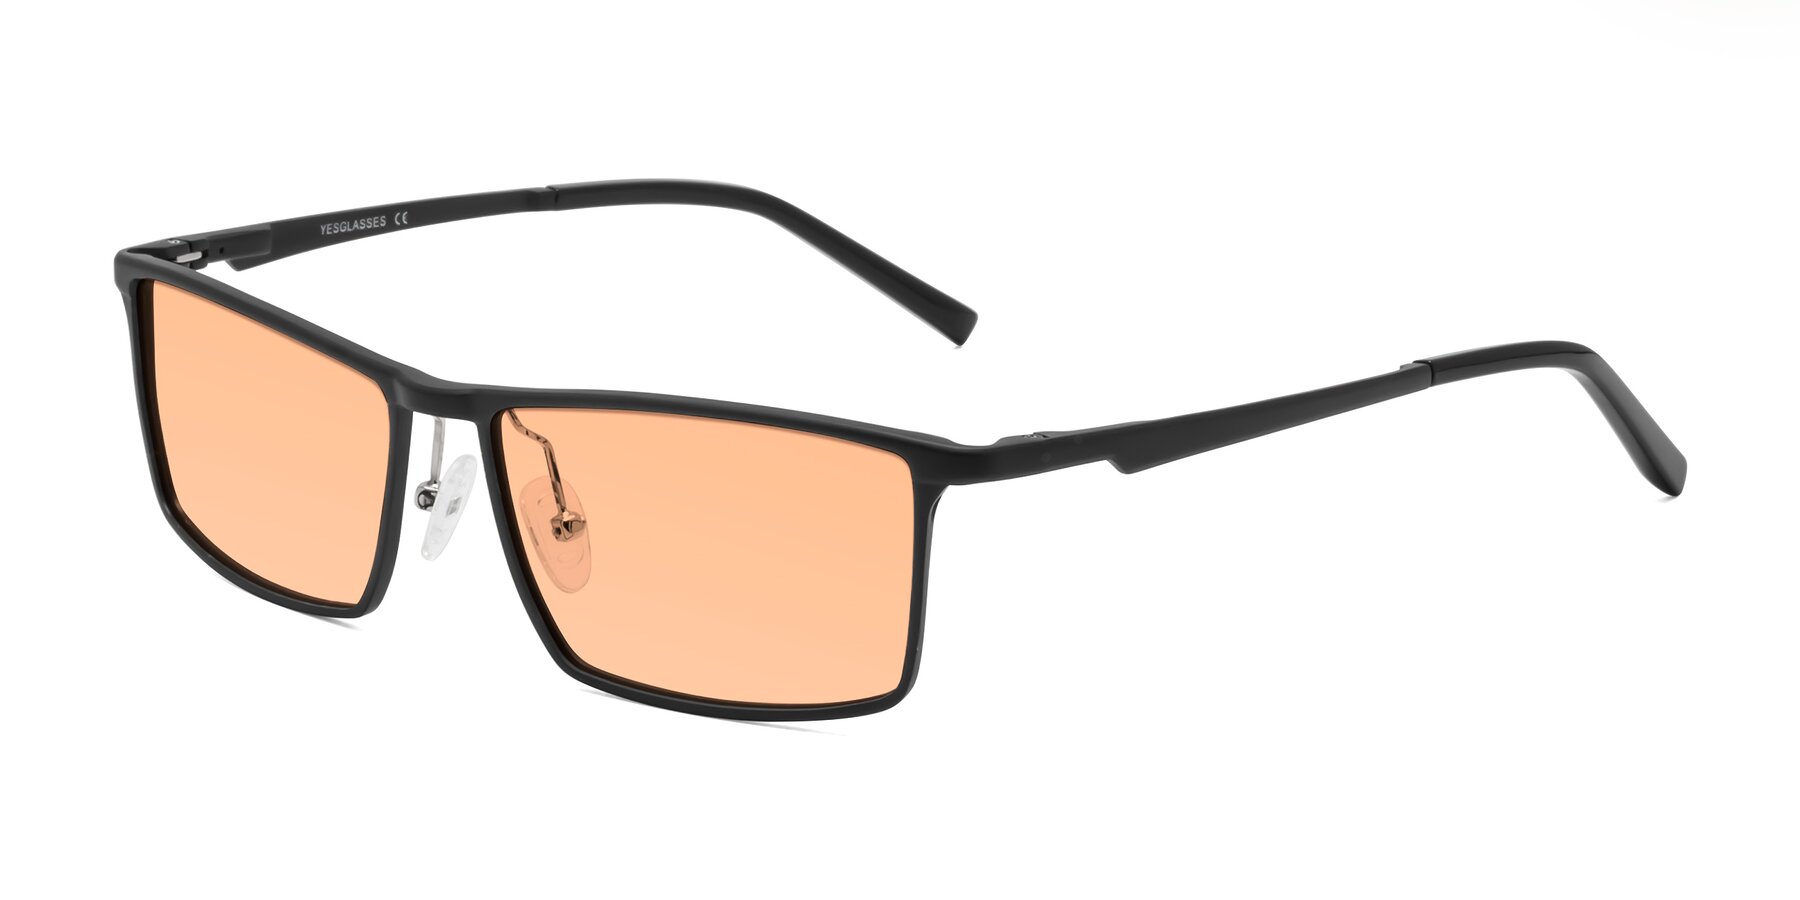 Angle of CX6330 in Black with Light Orange Tinted Lenses